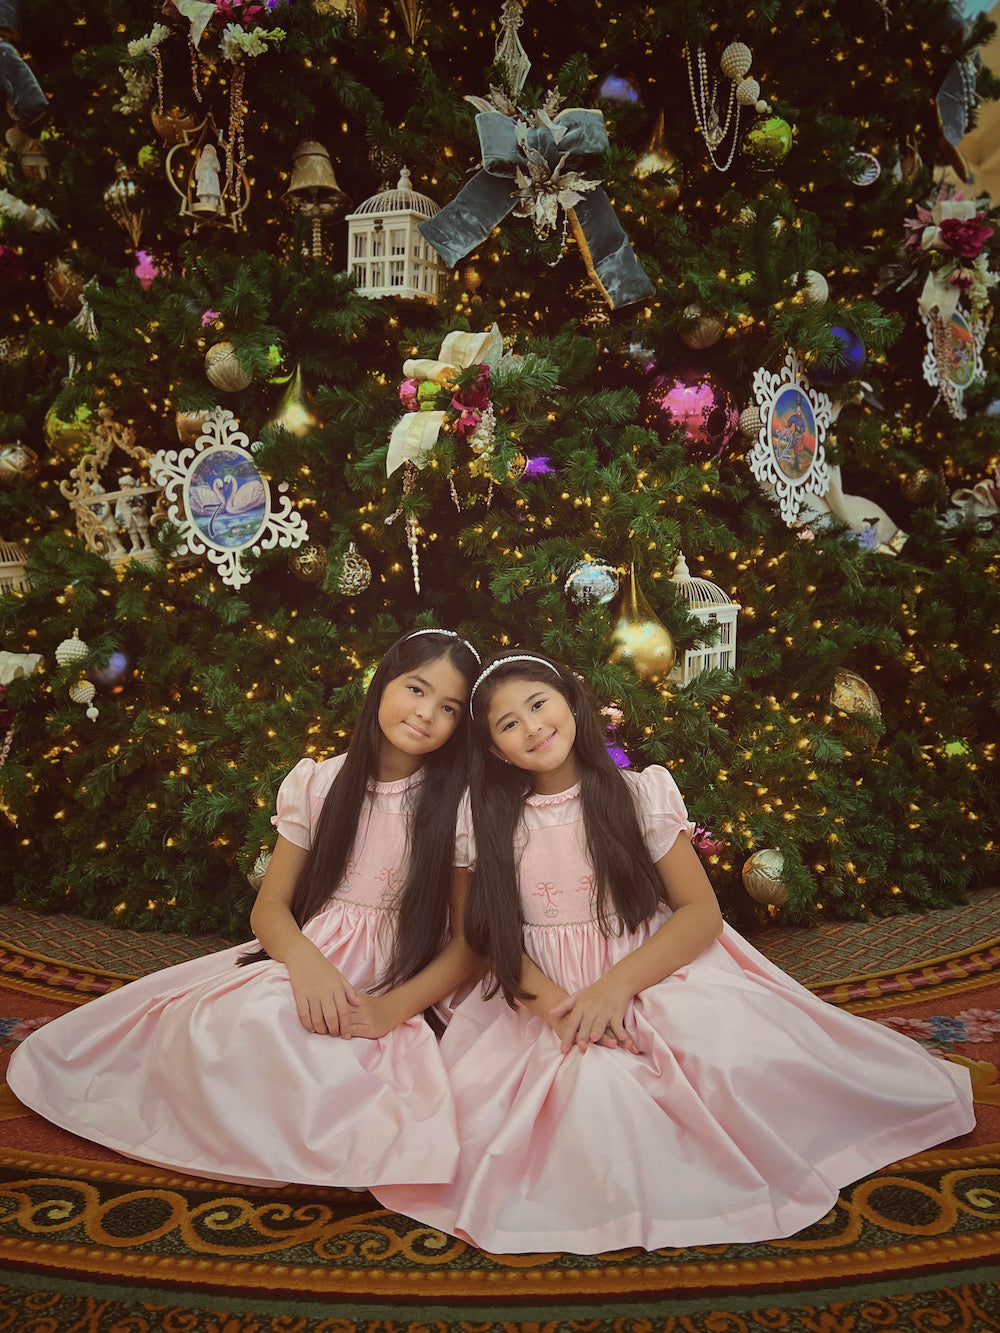 Christmas around the world - Family traditions in Florida - Traditional handmade pink holiday smocked dresses